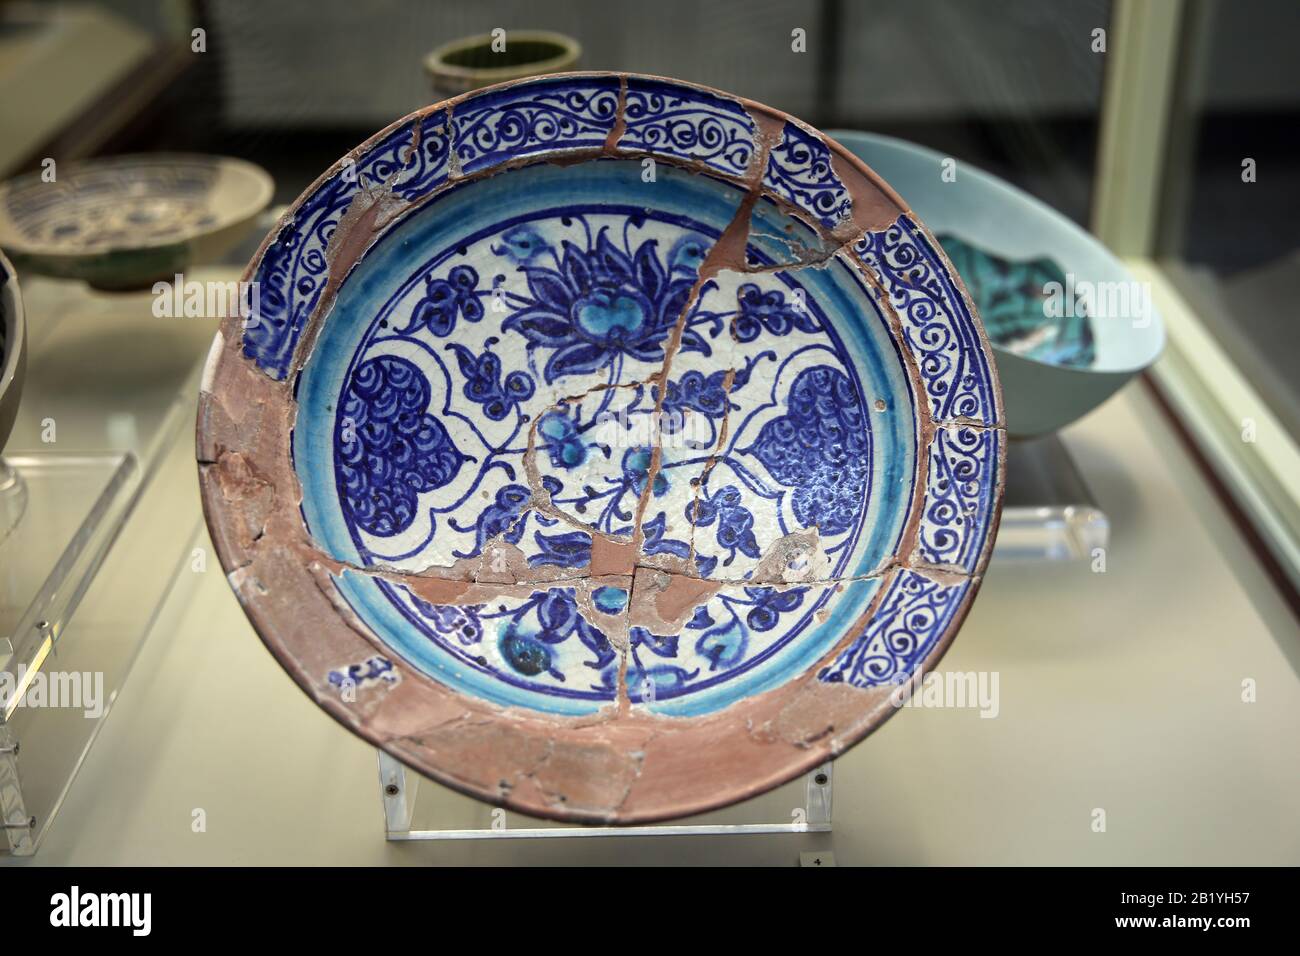 Miletus Ware. Plate. 14th-15th century. Produced in Iznik. Geometrical and vegetal motifs. Blue color. Istanbul Archaeology Museums. Museum of Islamic Stock Photo